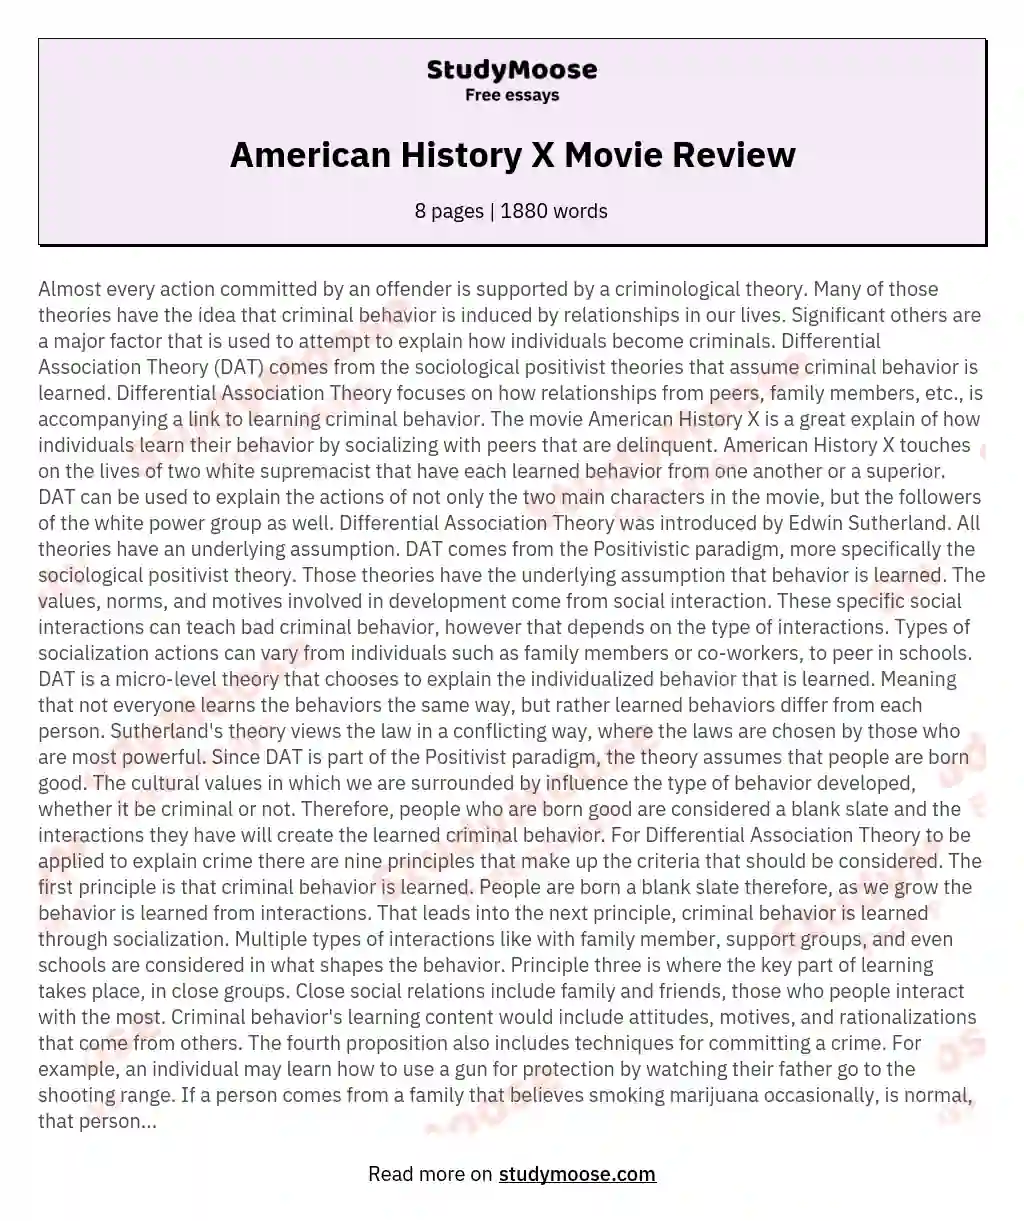 American History X Movie Review essay